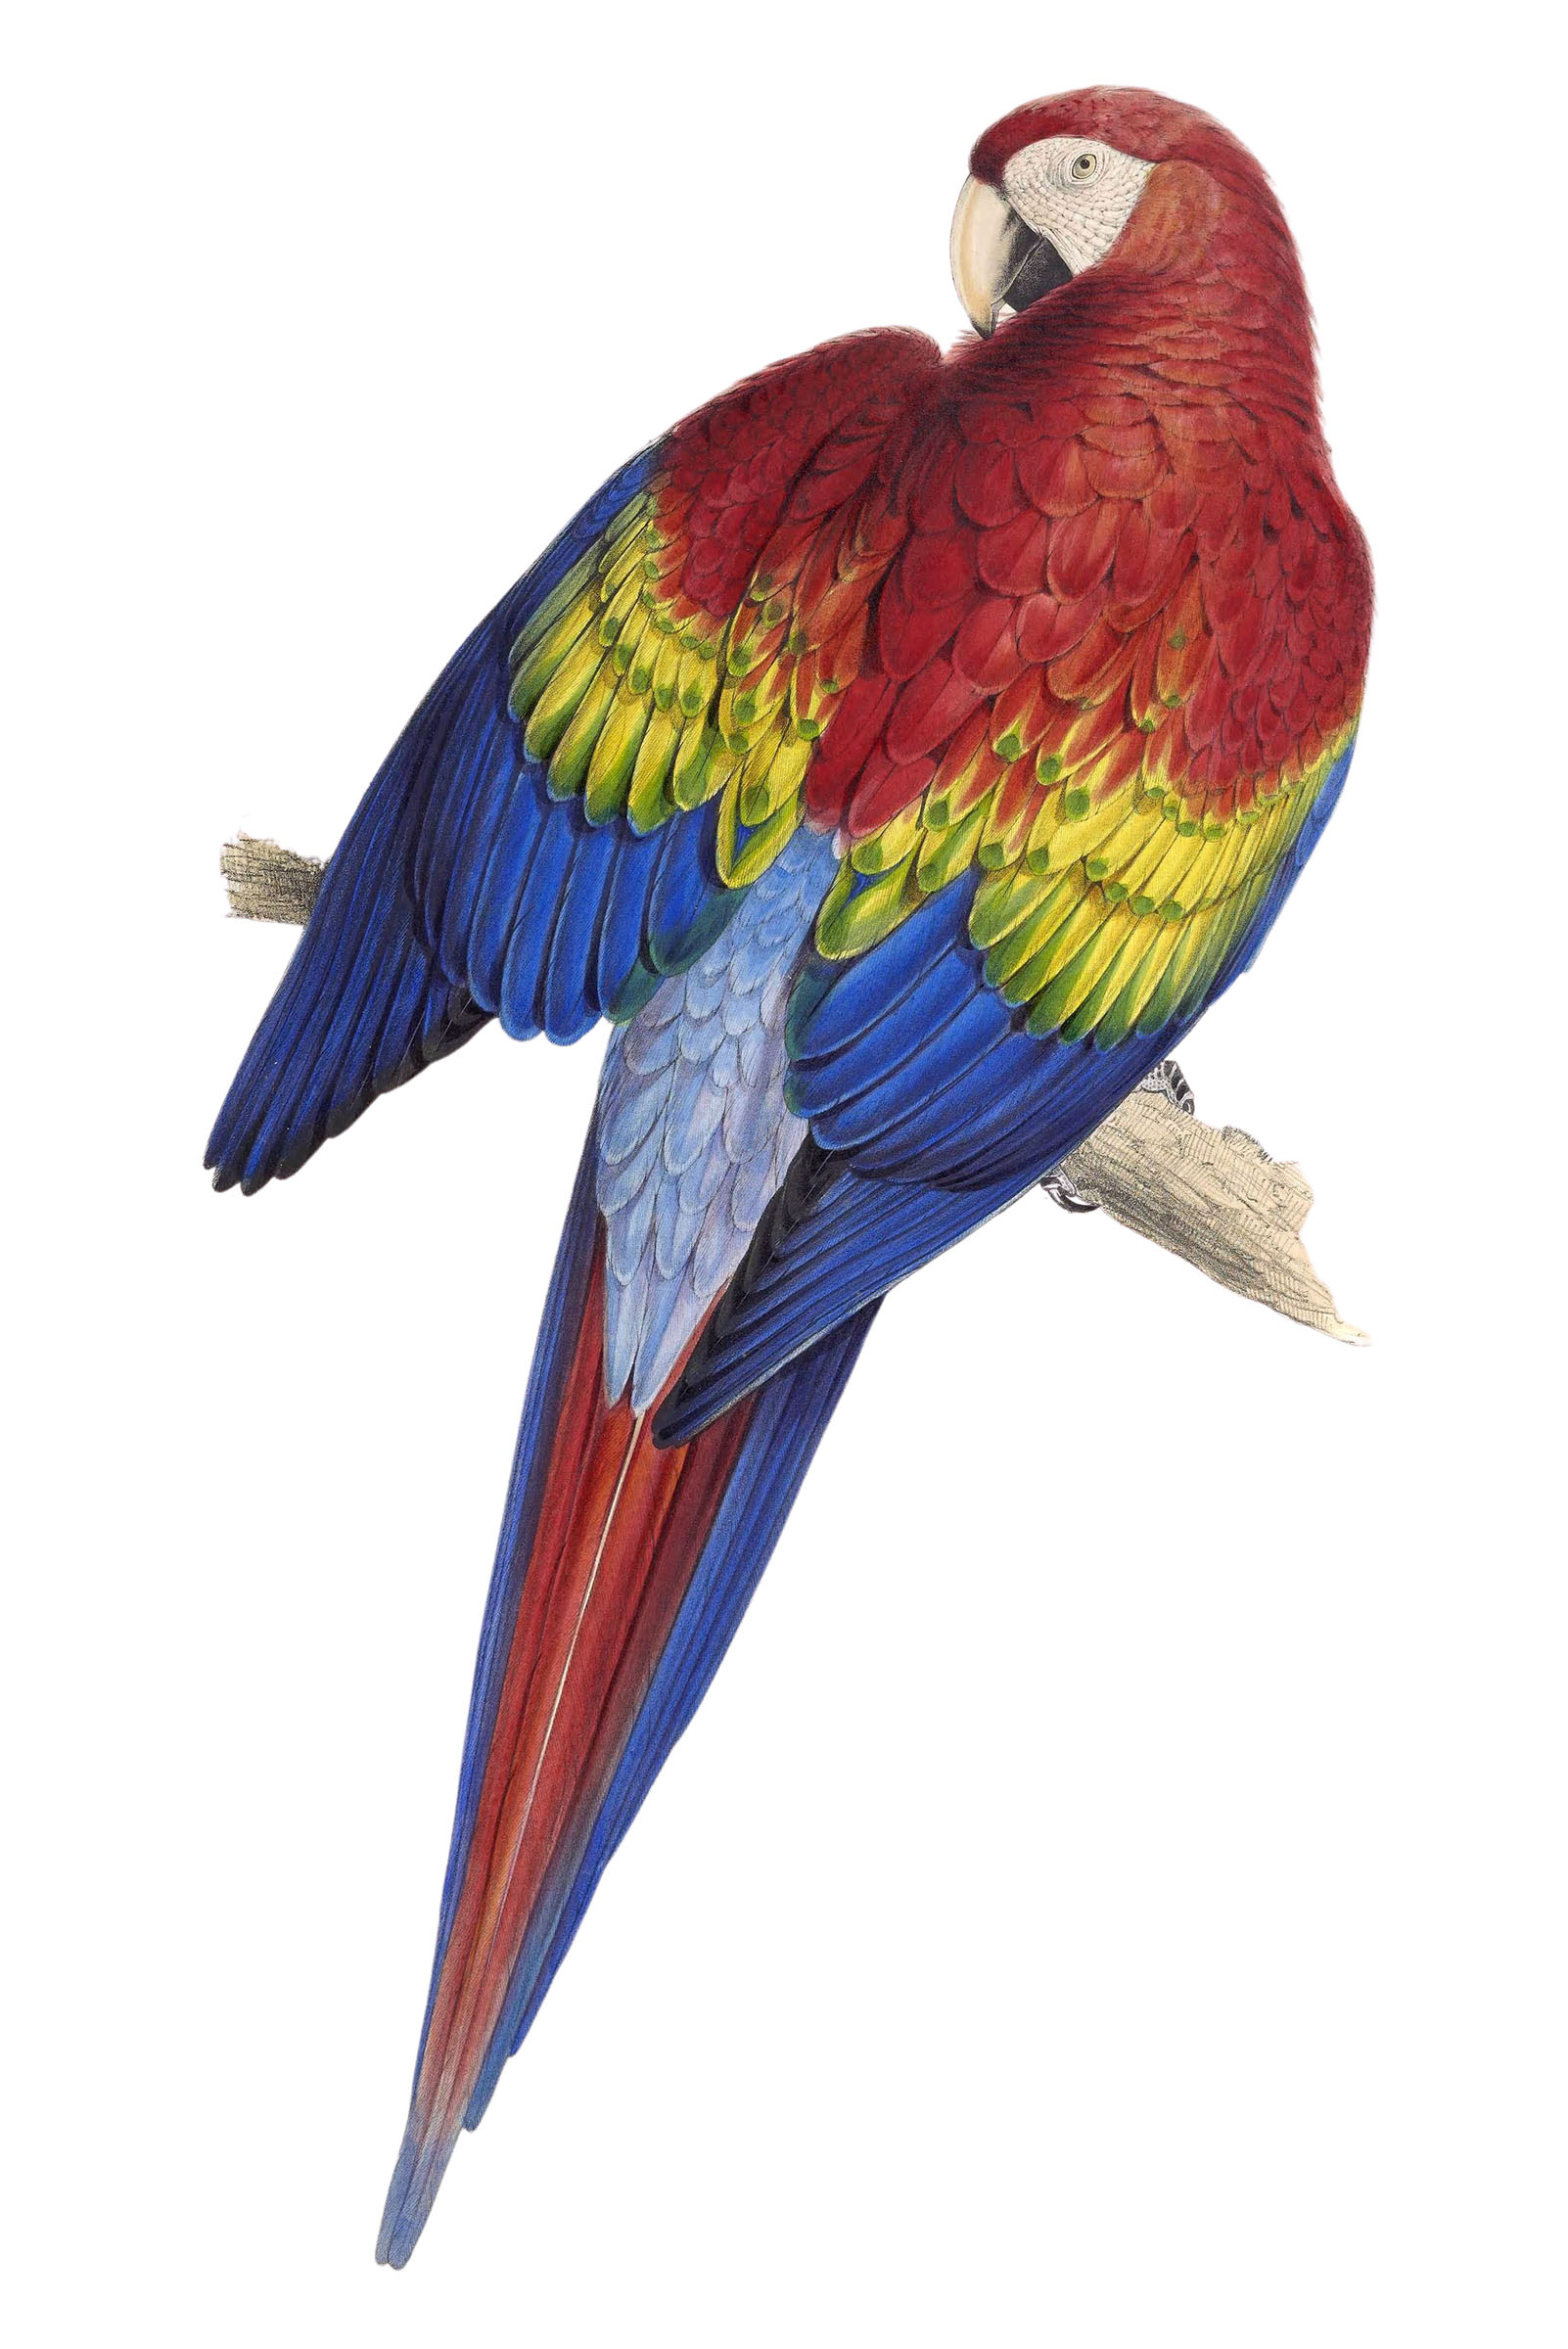 Macaw Parrot Image